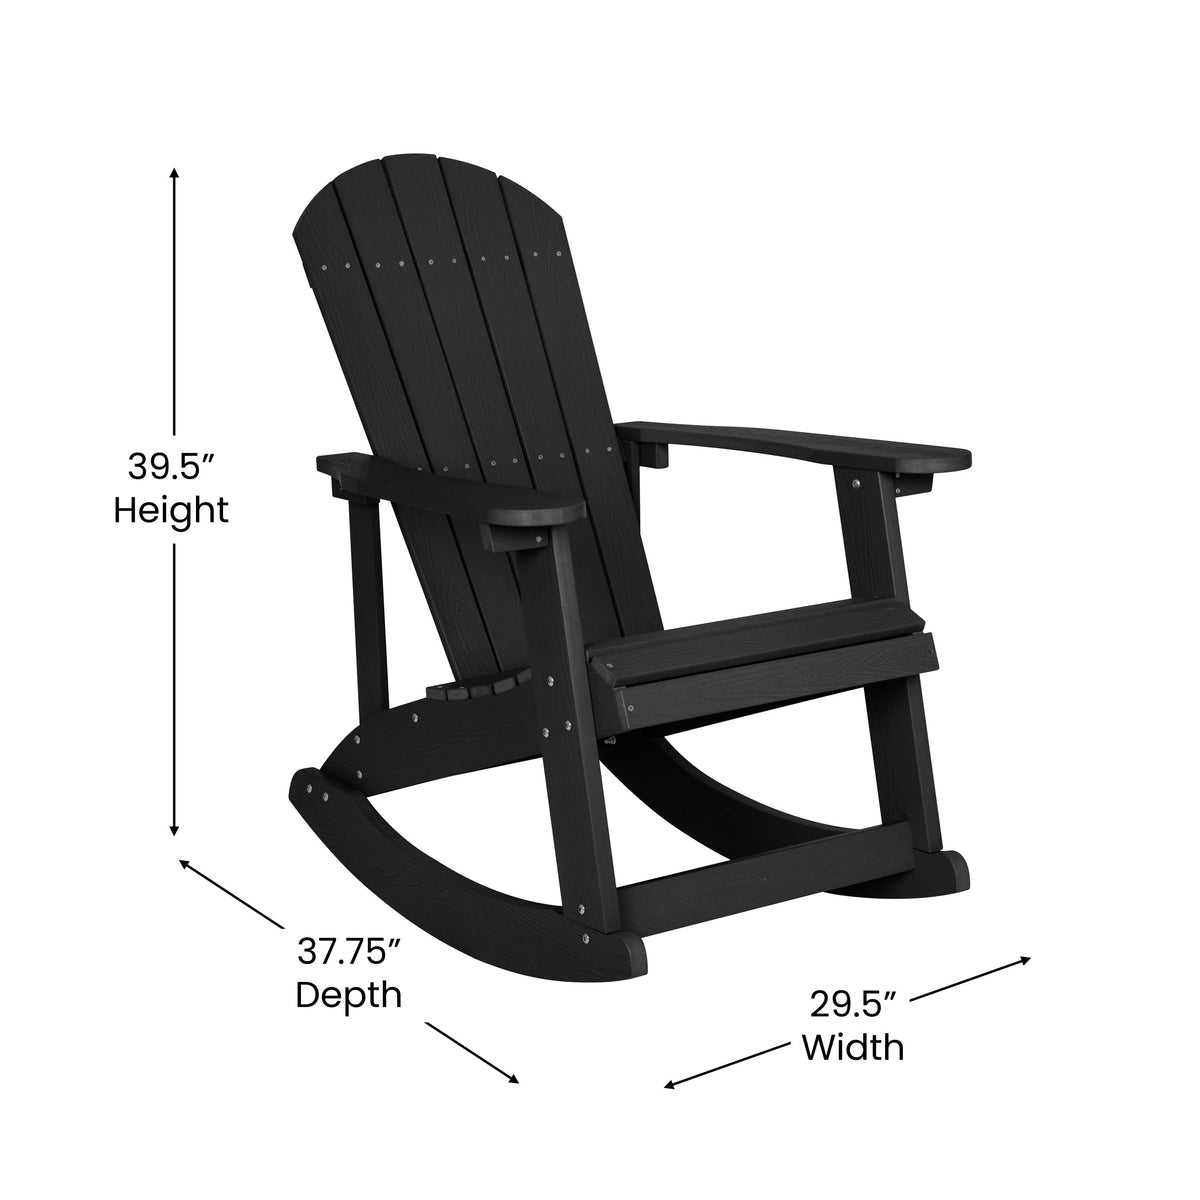 Black |#| Adirondack Poly Resin Rocking Chairs for Indoor/Outdoor Use in Black - 2 Pack